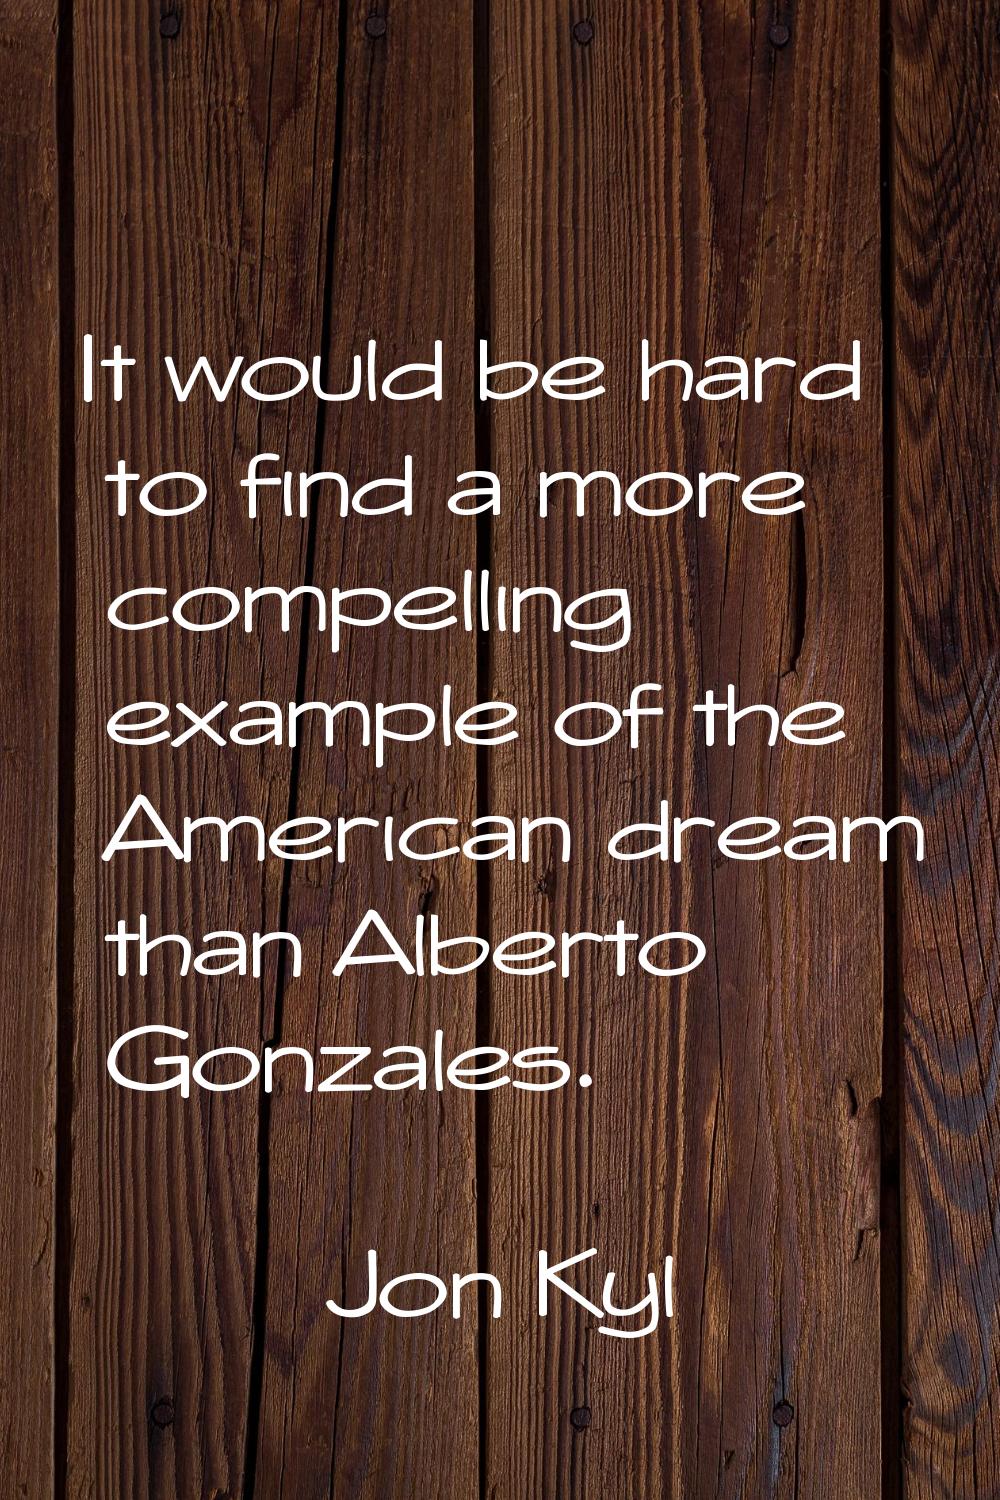 It would be hard to find a more compelling example of the American dream than Alberto Gonzales.